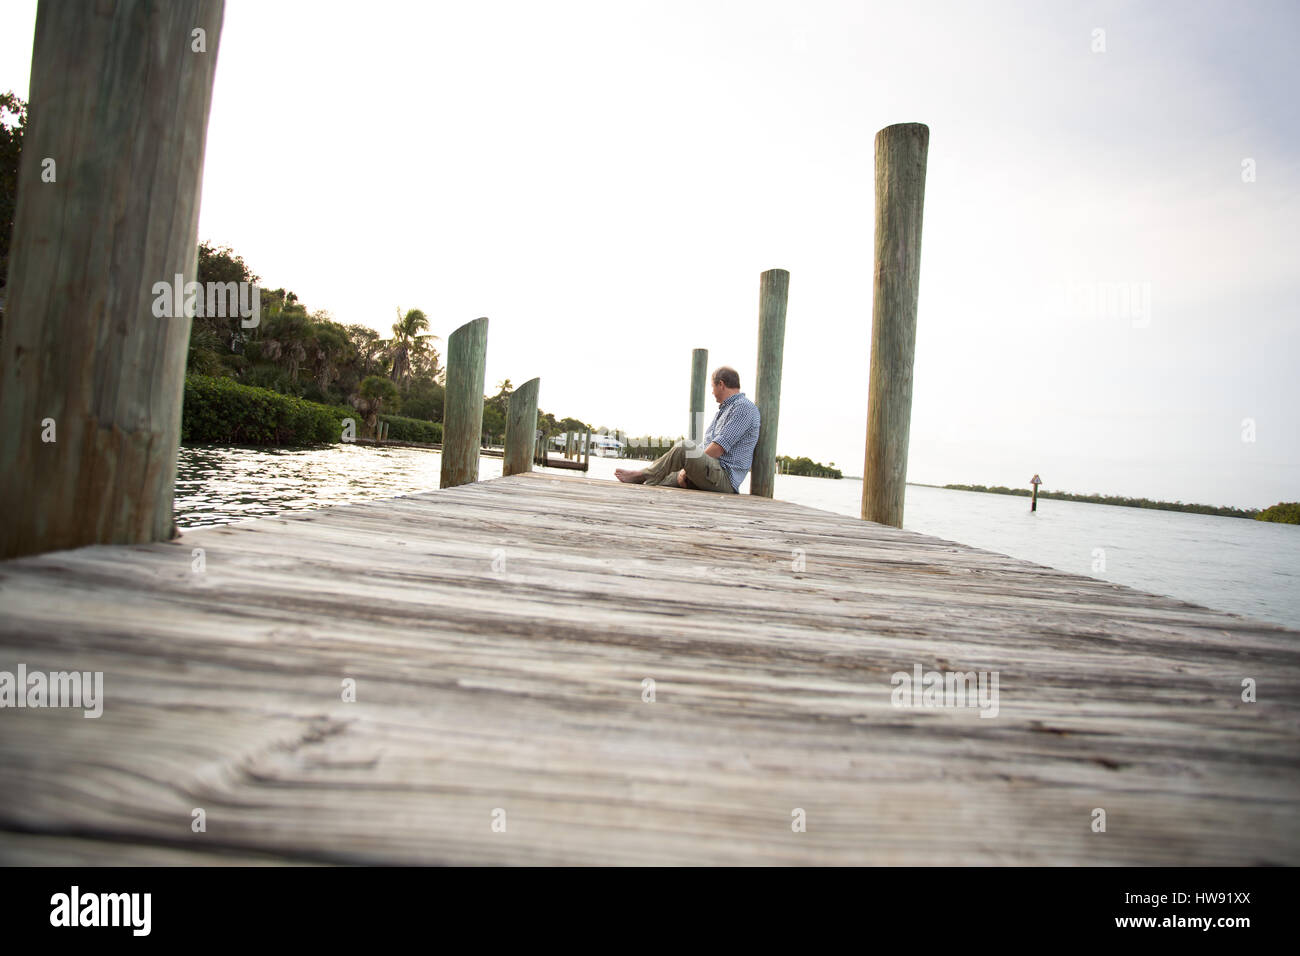 Man on dock in Cabbage Key Florida Stock Photo